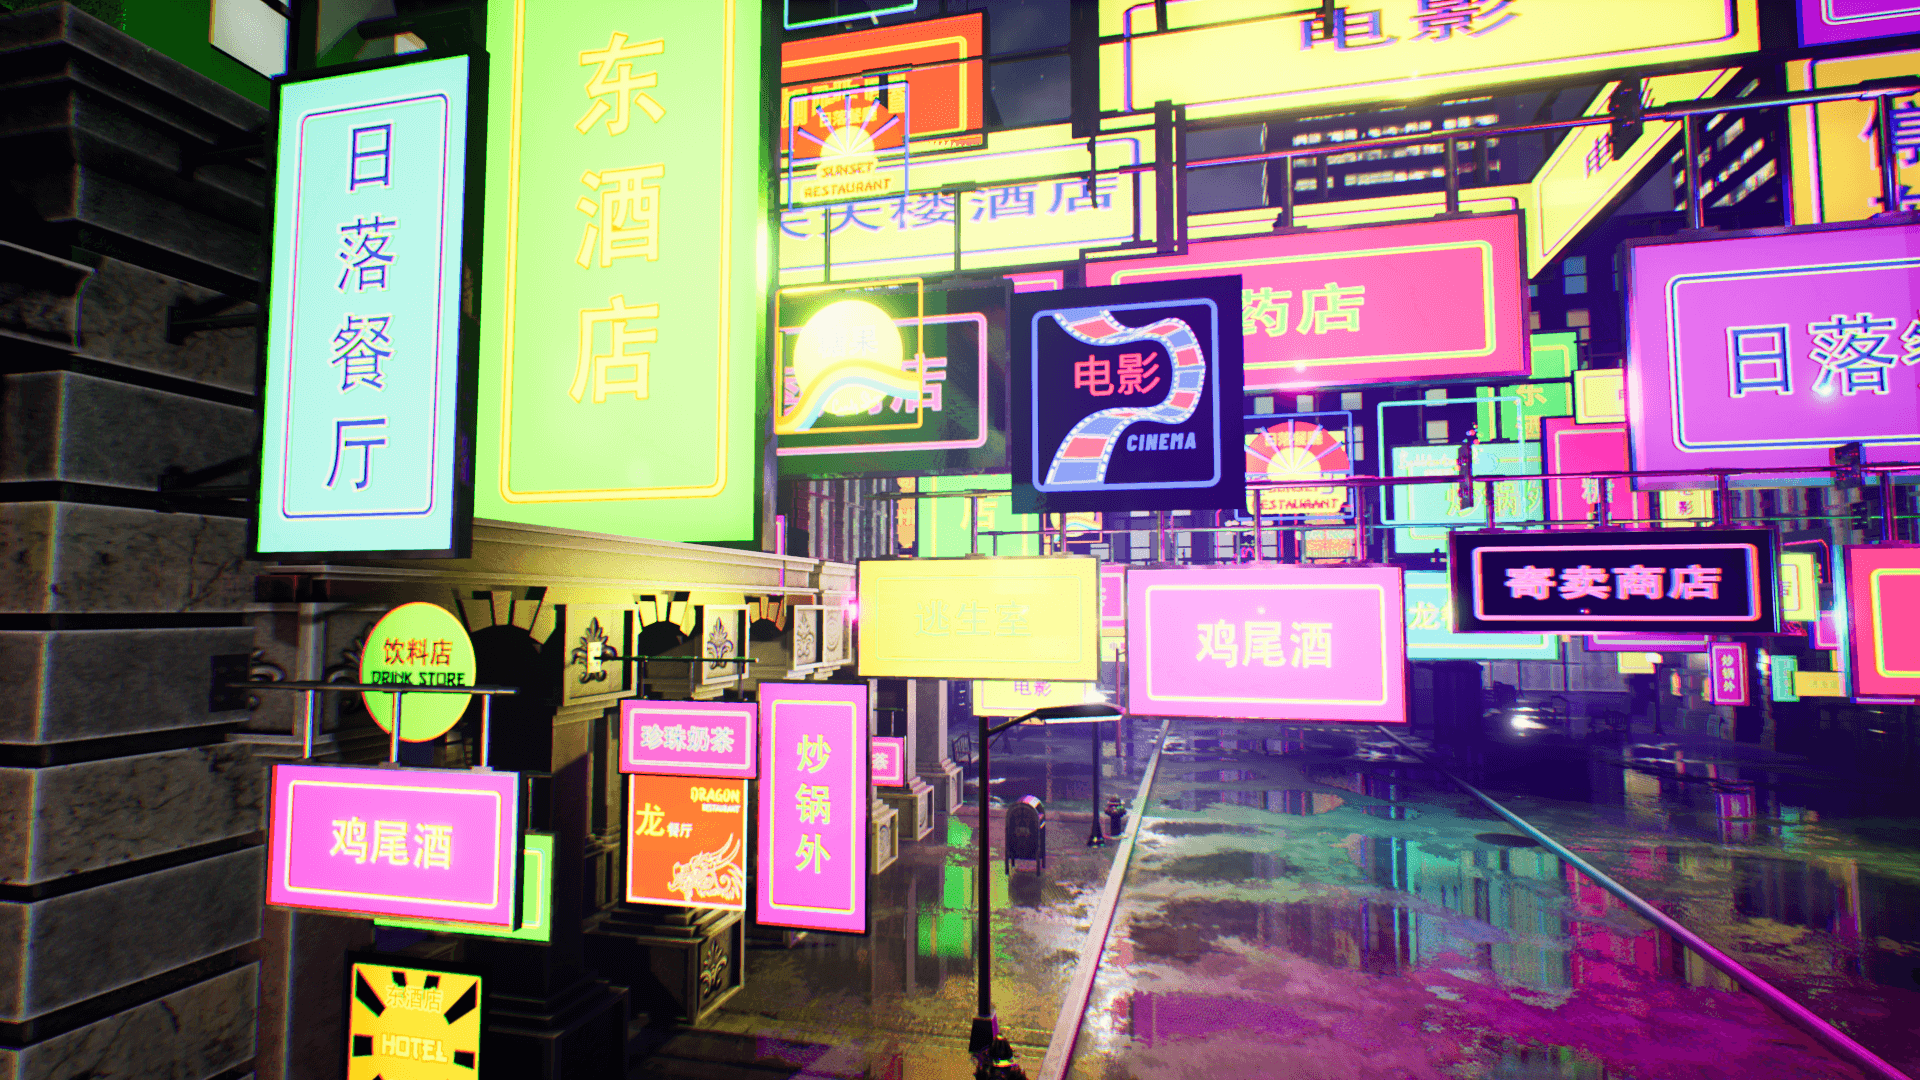 An image showing Chinese Neon Signs asset pack, created with Unreal Engine.